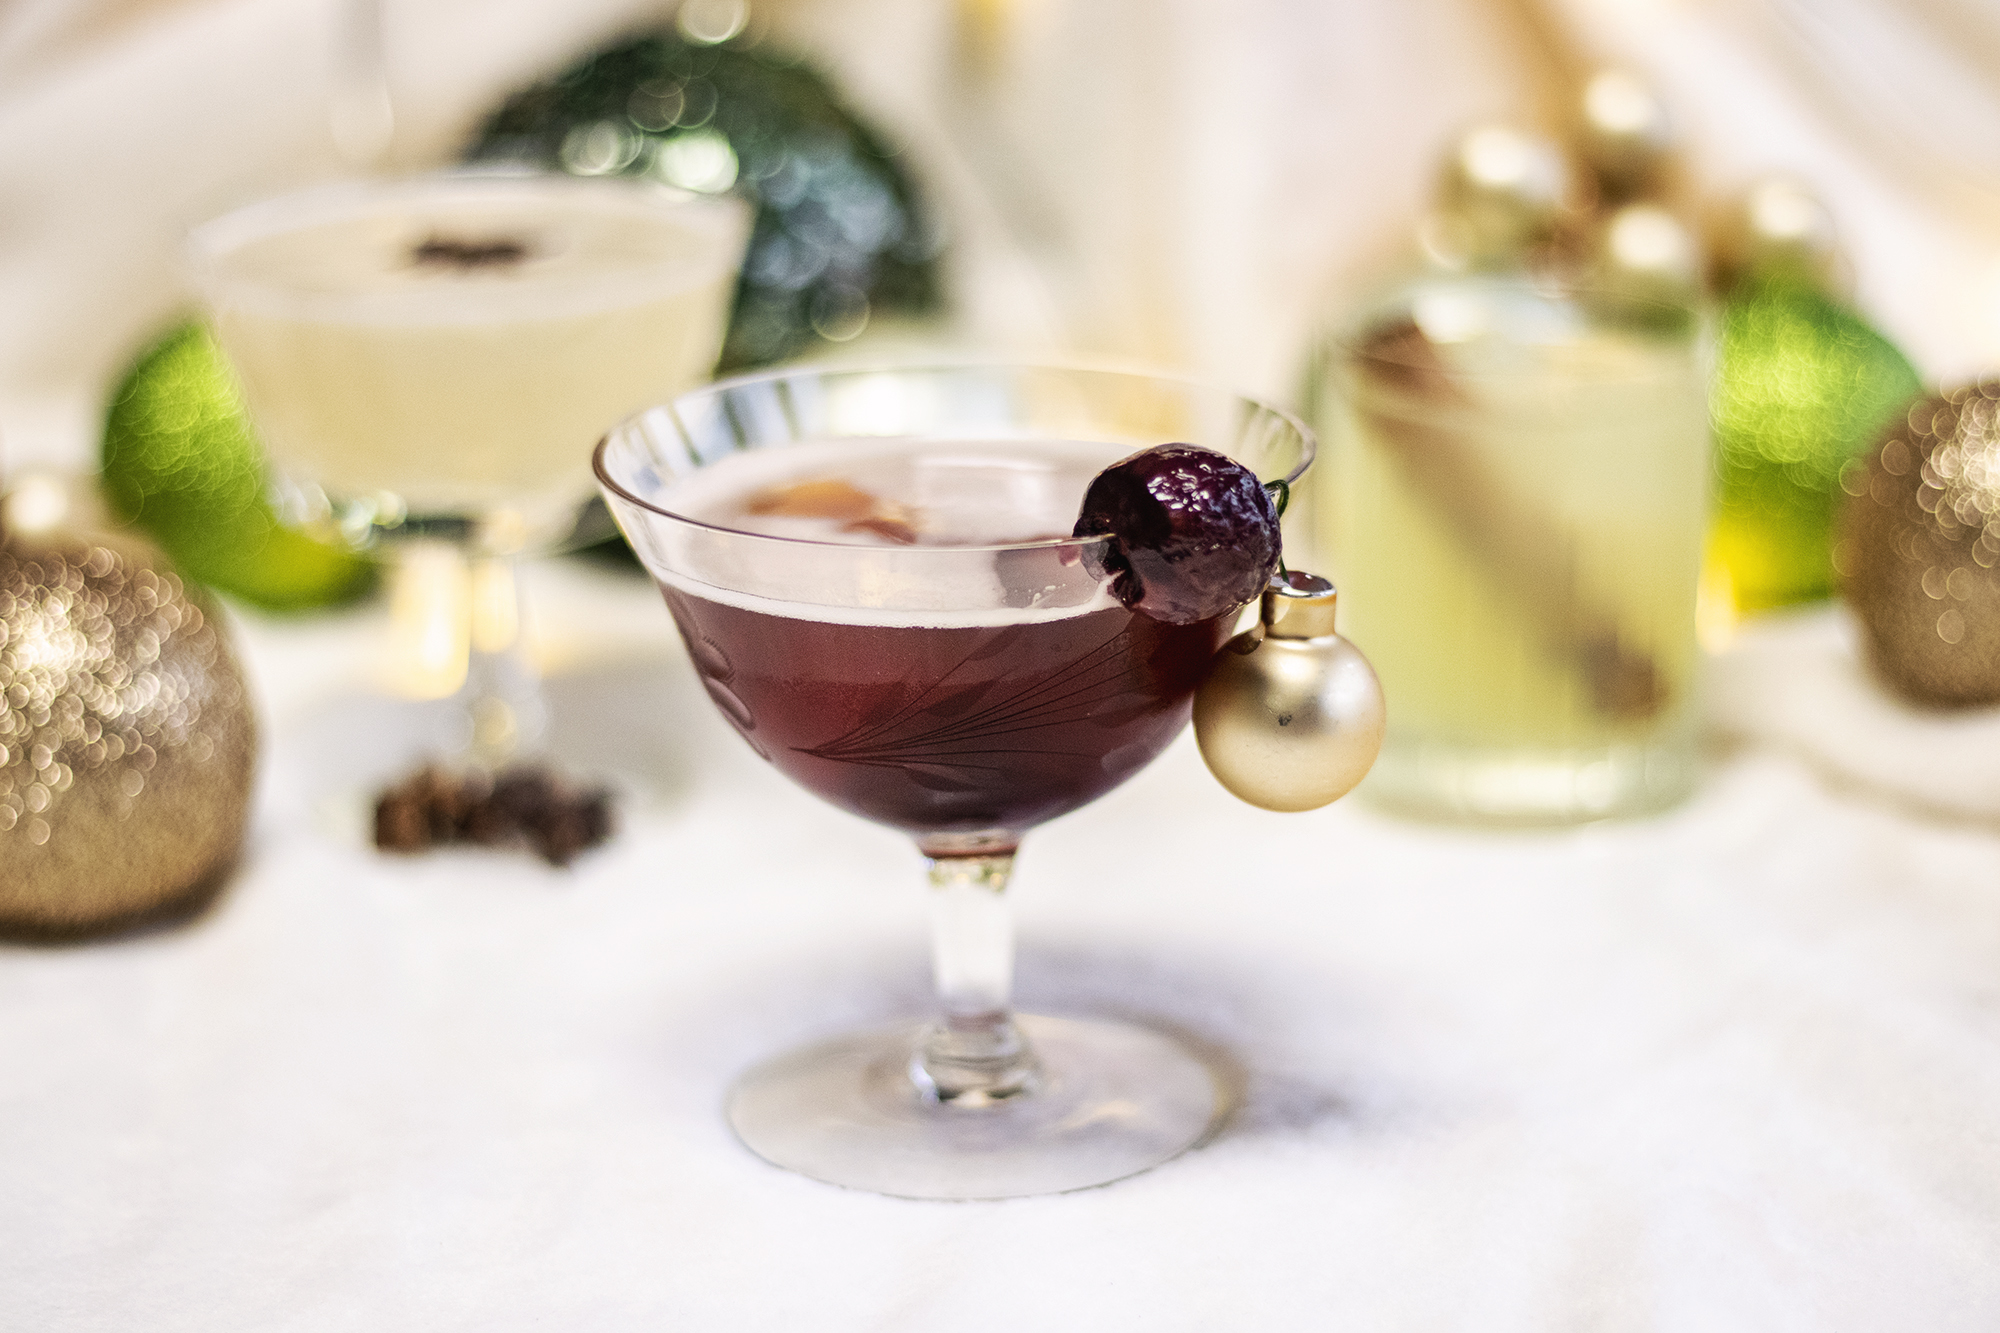 Happy Hour: The 3 Grappas of Christmas